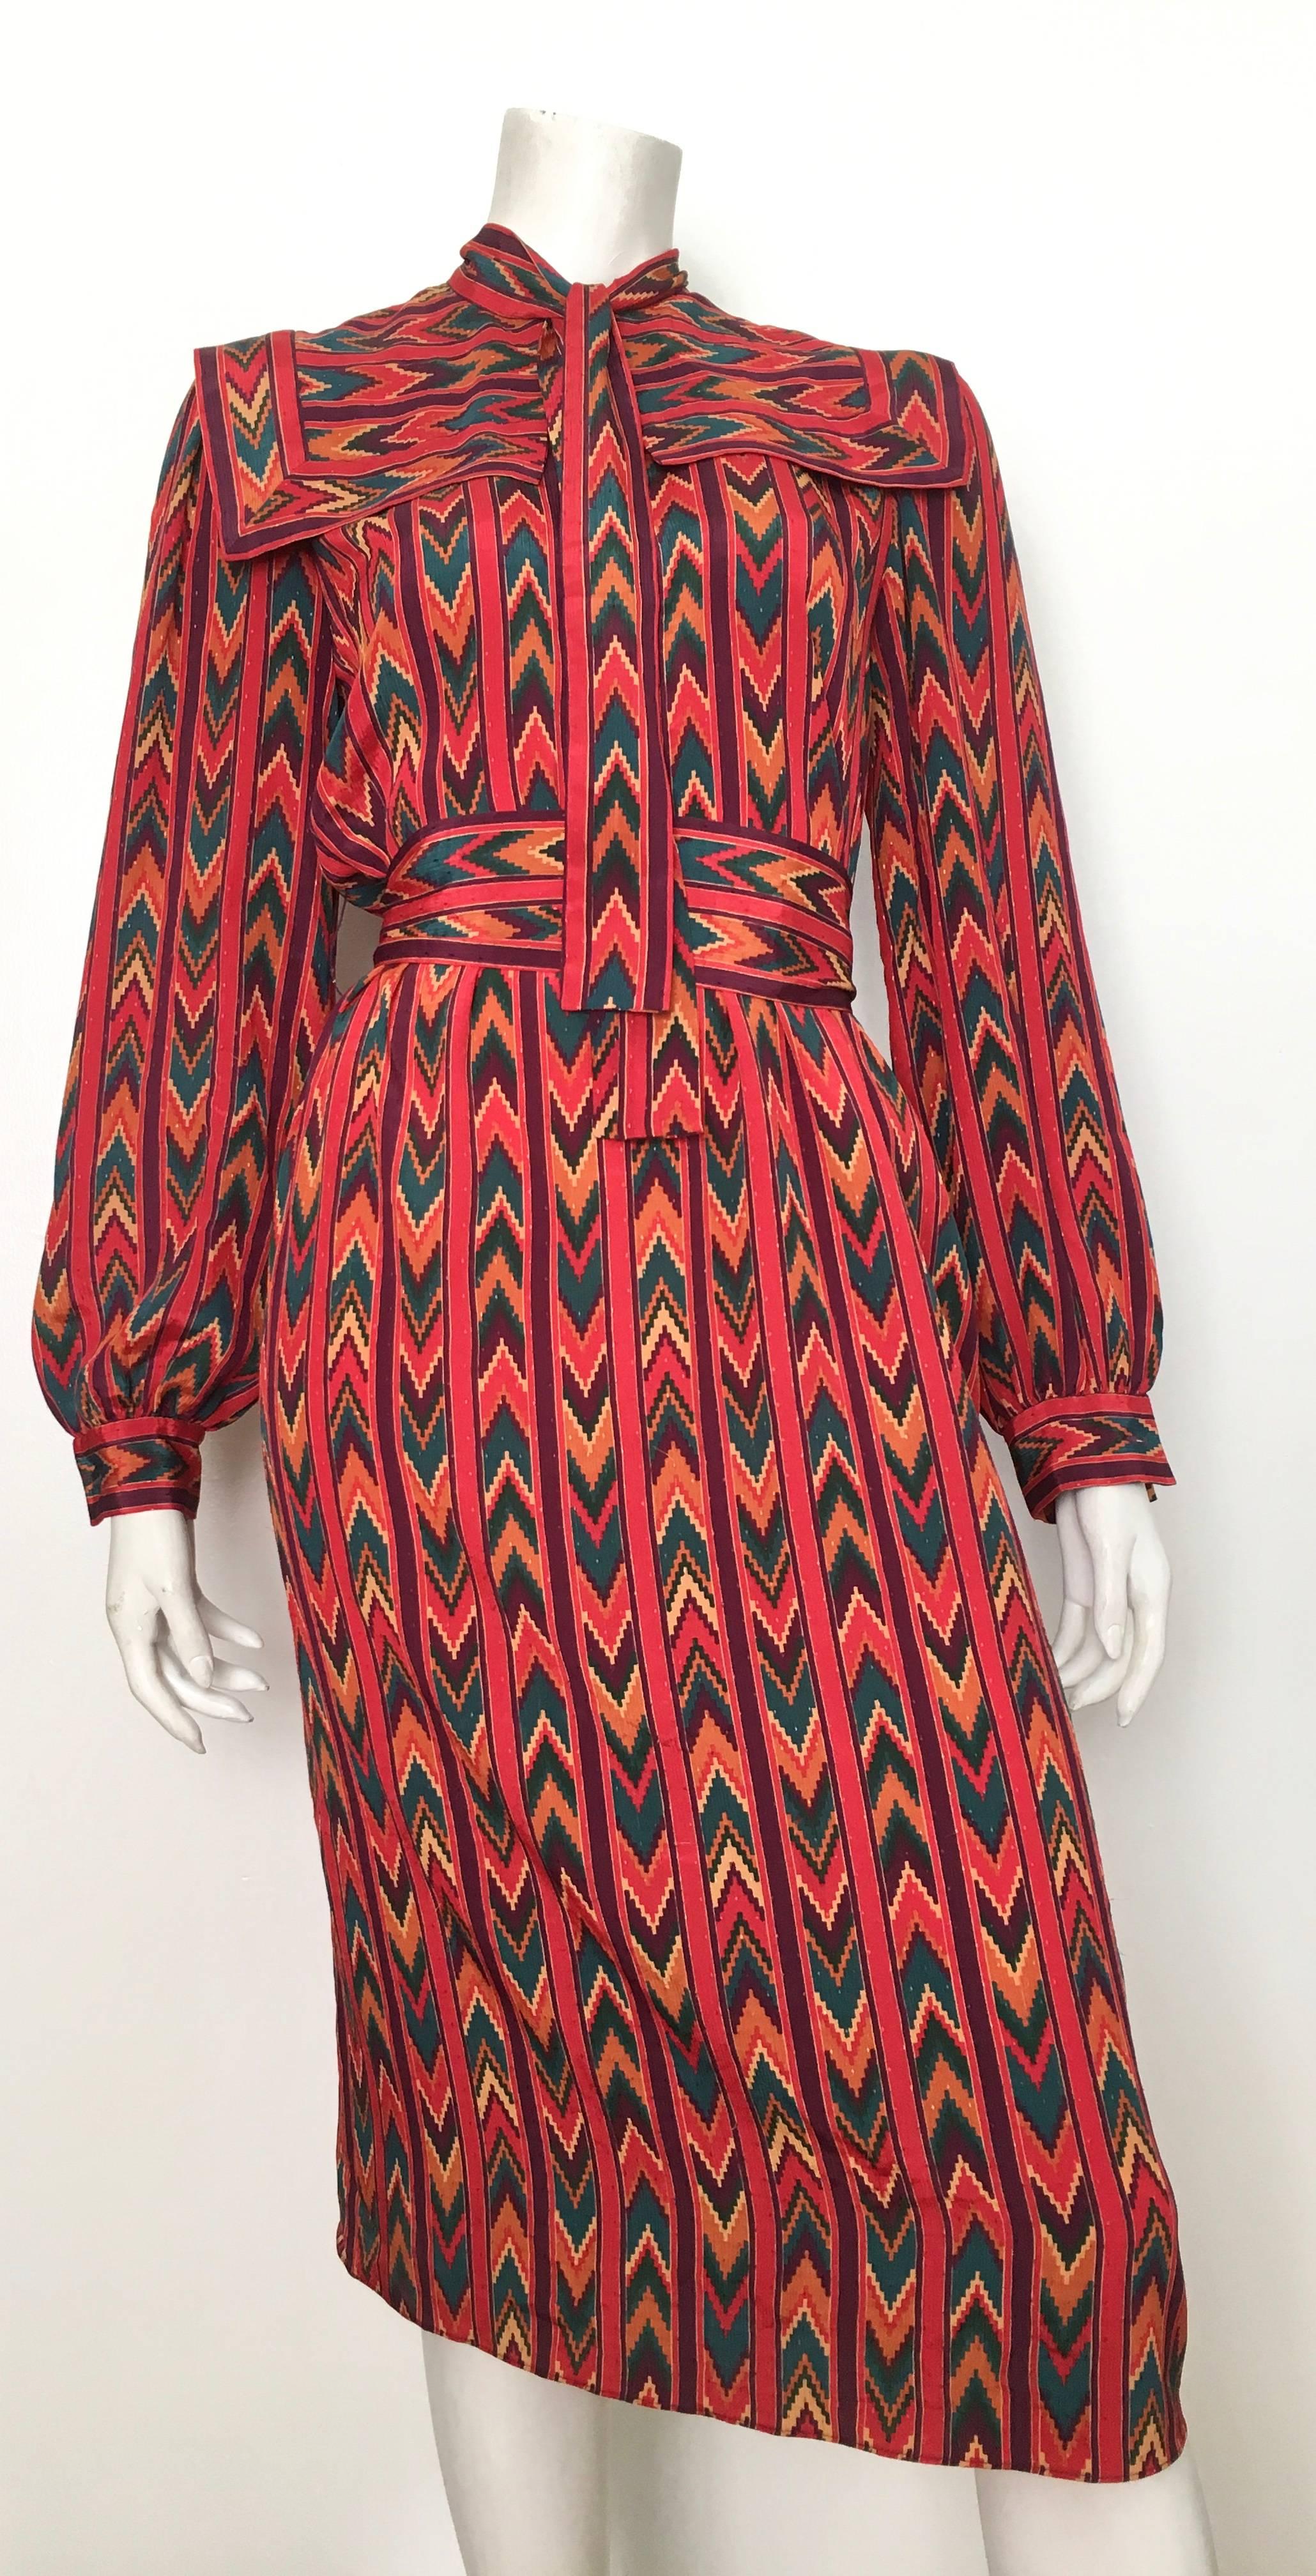 Molly Parnis 1980s Native American Print Dress Size 10. For Sale 3